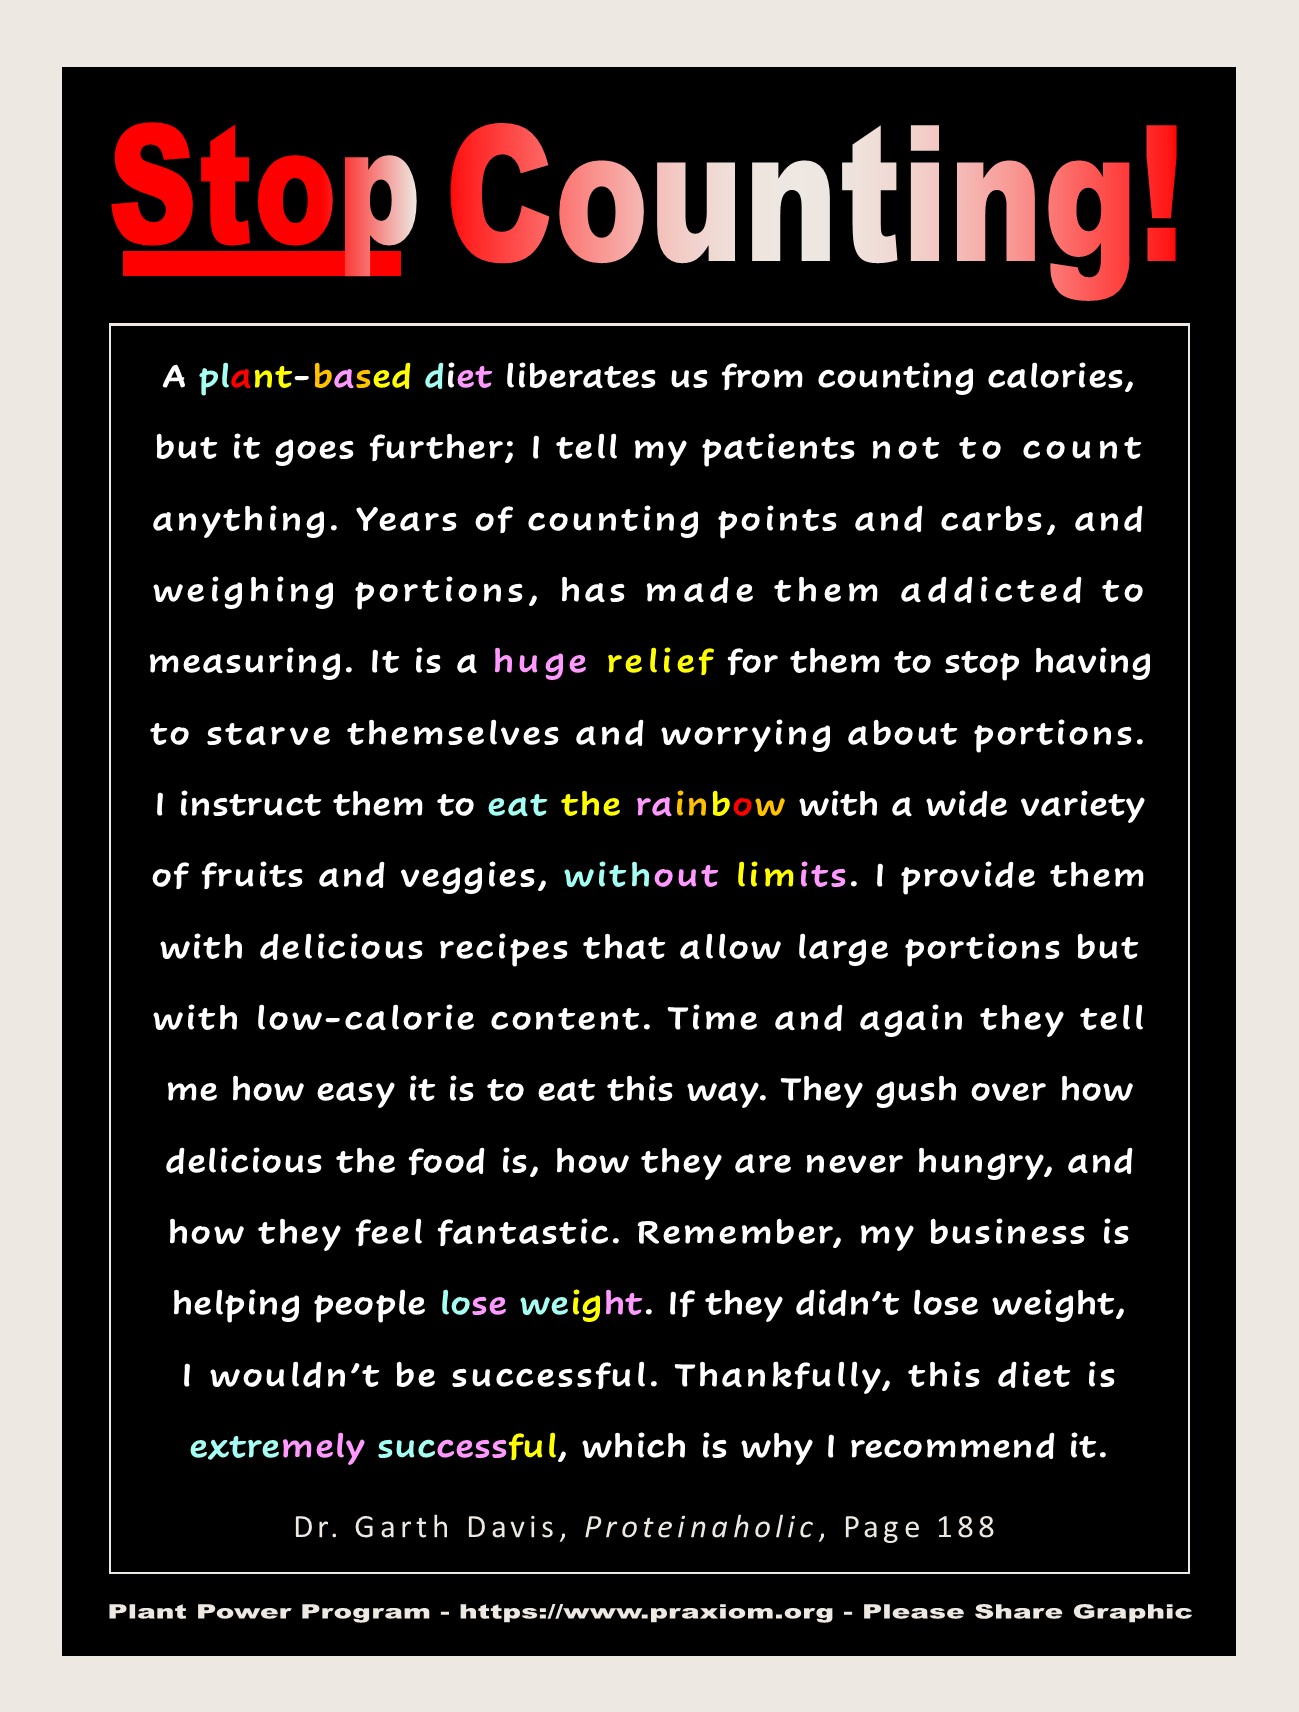 Stop Counting - Dr. Garth Davis